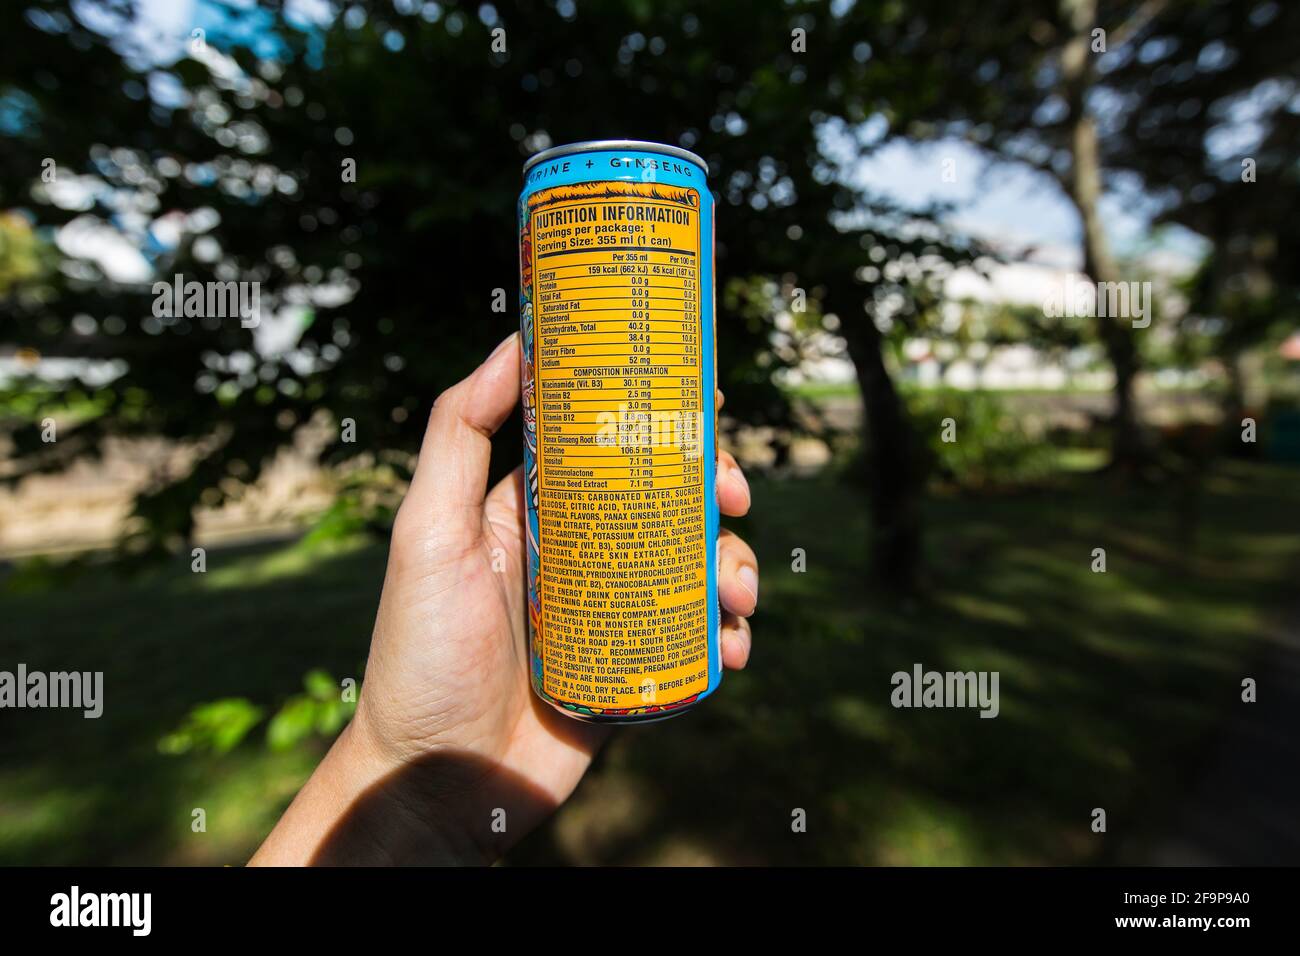 A hand holding a Monster Energy can drink showing nutrition information content. Stock Photo